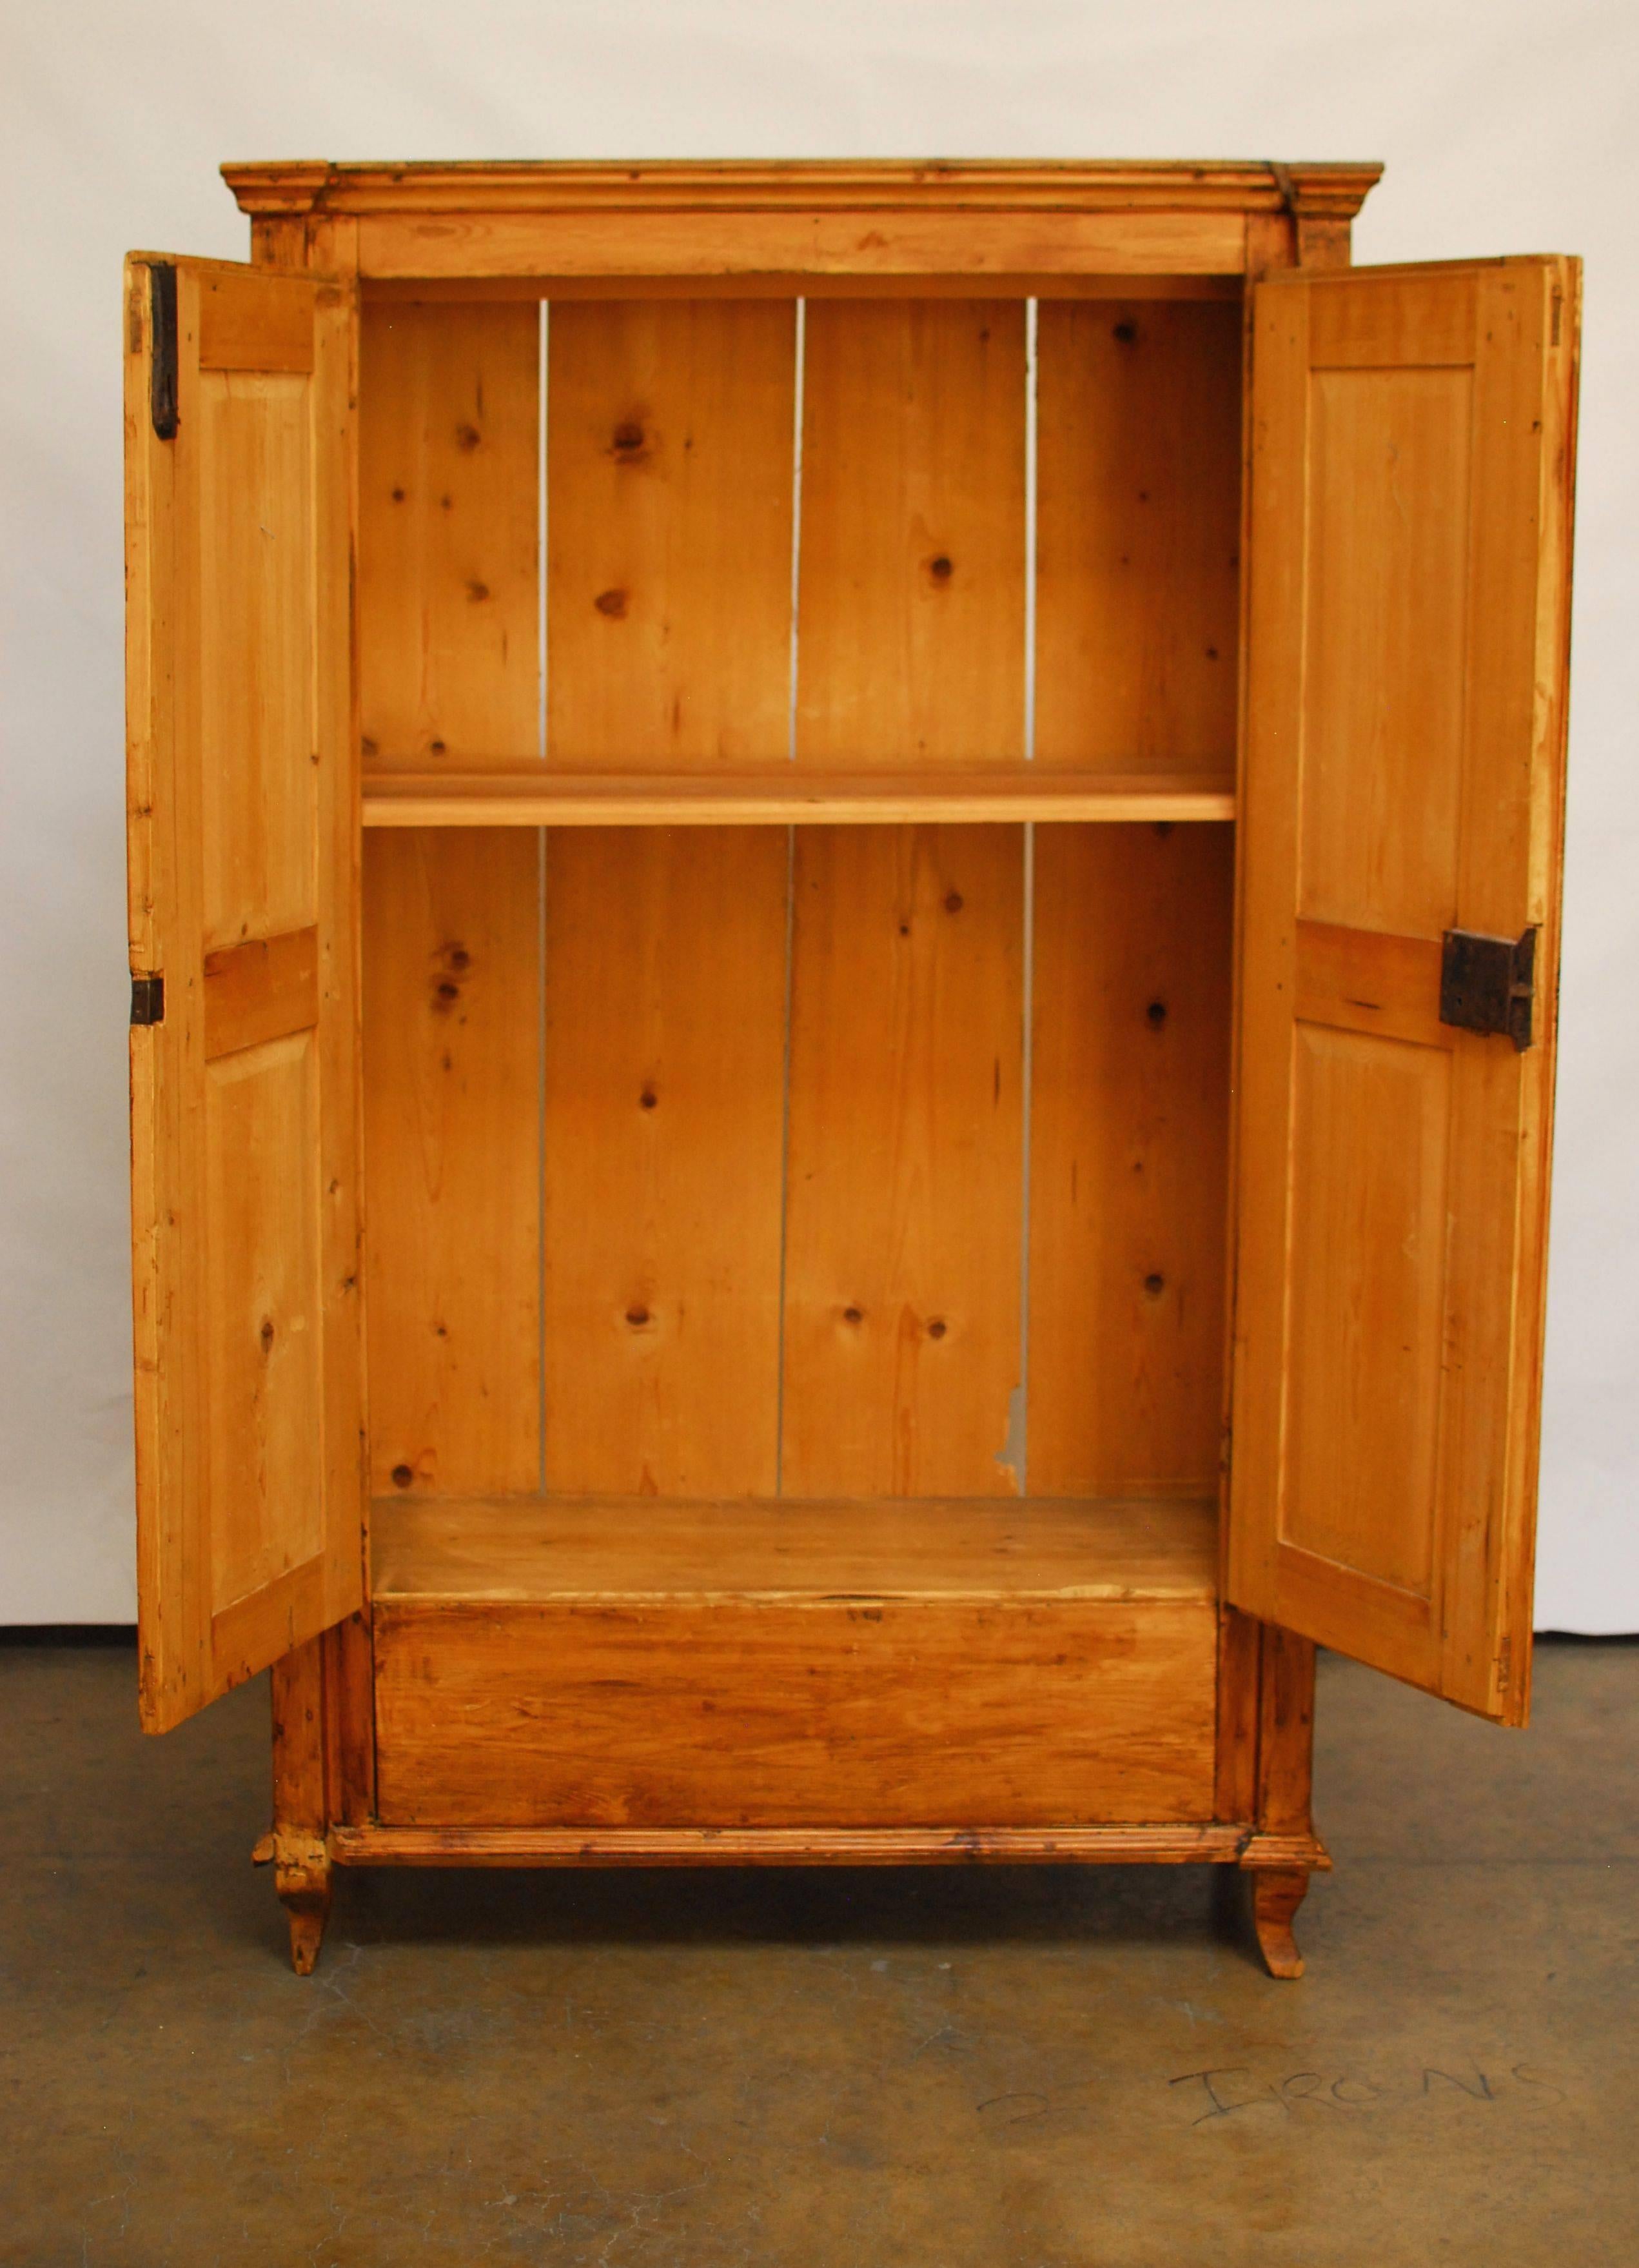 A rustic 19th century French country pine armoire with decorative carved side columns that extend to the top molding. Period correct hardware and lock plates. Made with wood peg joinery and hand dove tail construction bottom storage drawer. Sits on